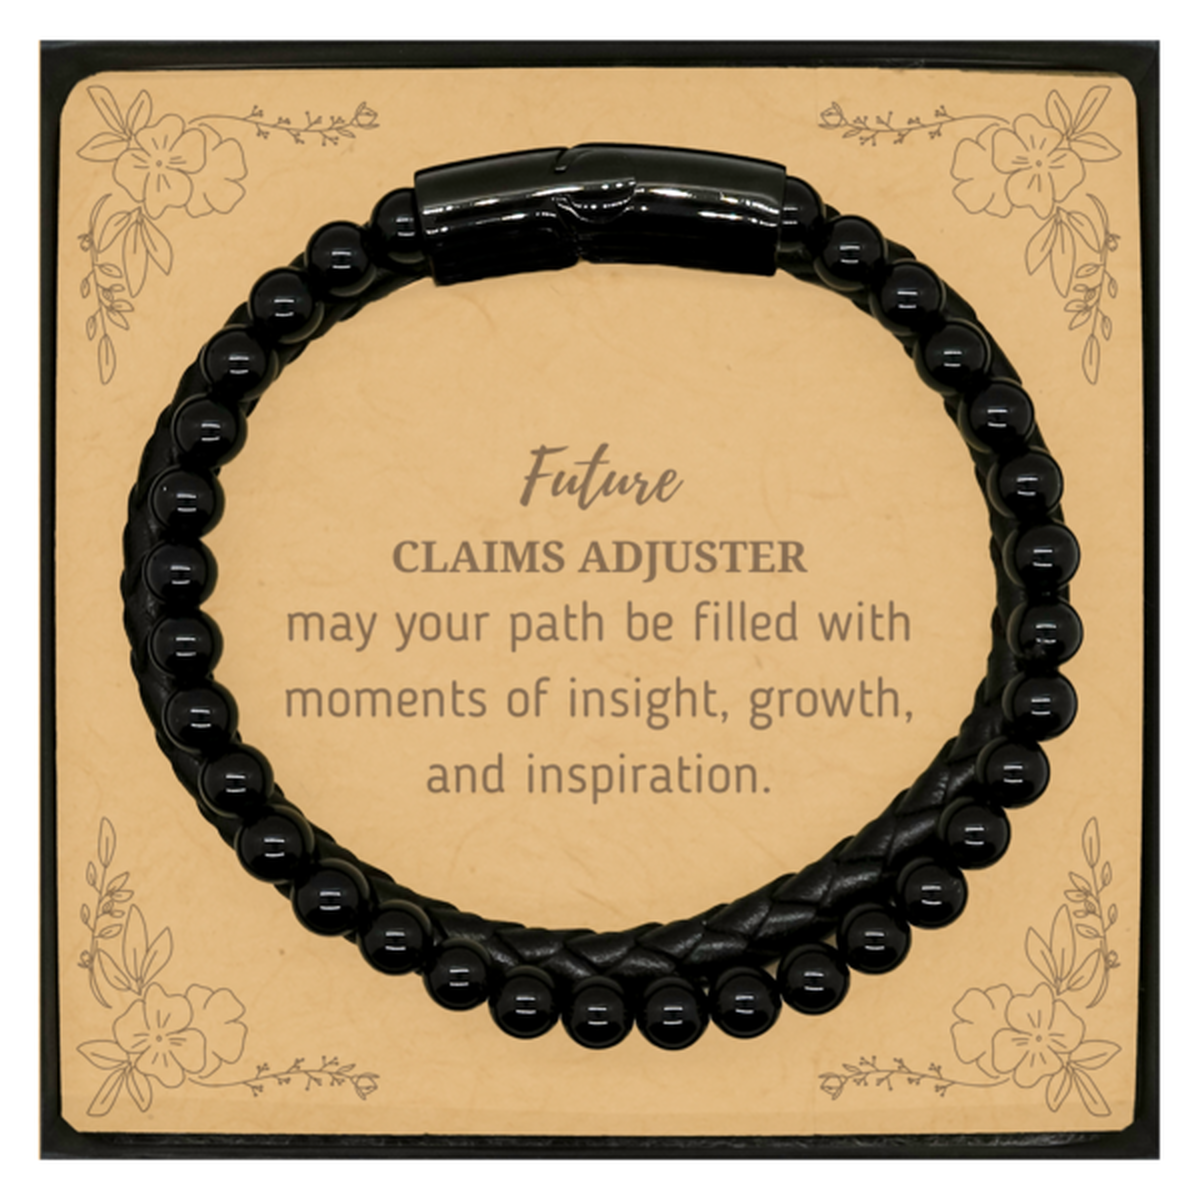 Future Claims Adjuster Gifts, May your path be filled with moments of insight, Graduation Gifts for New Claims Adjuster, Christmas Unique Stone Leather Bracelets For Men, Women, Friends